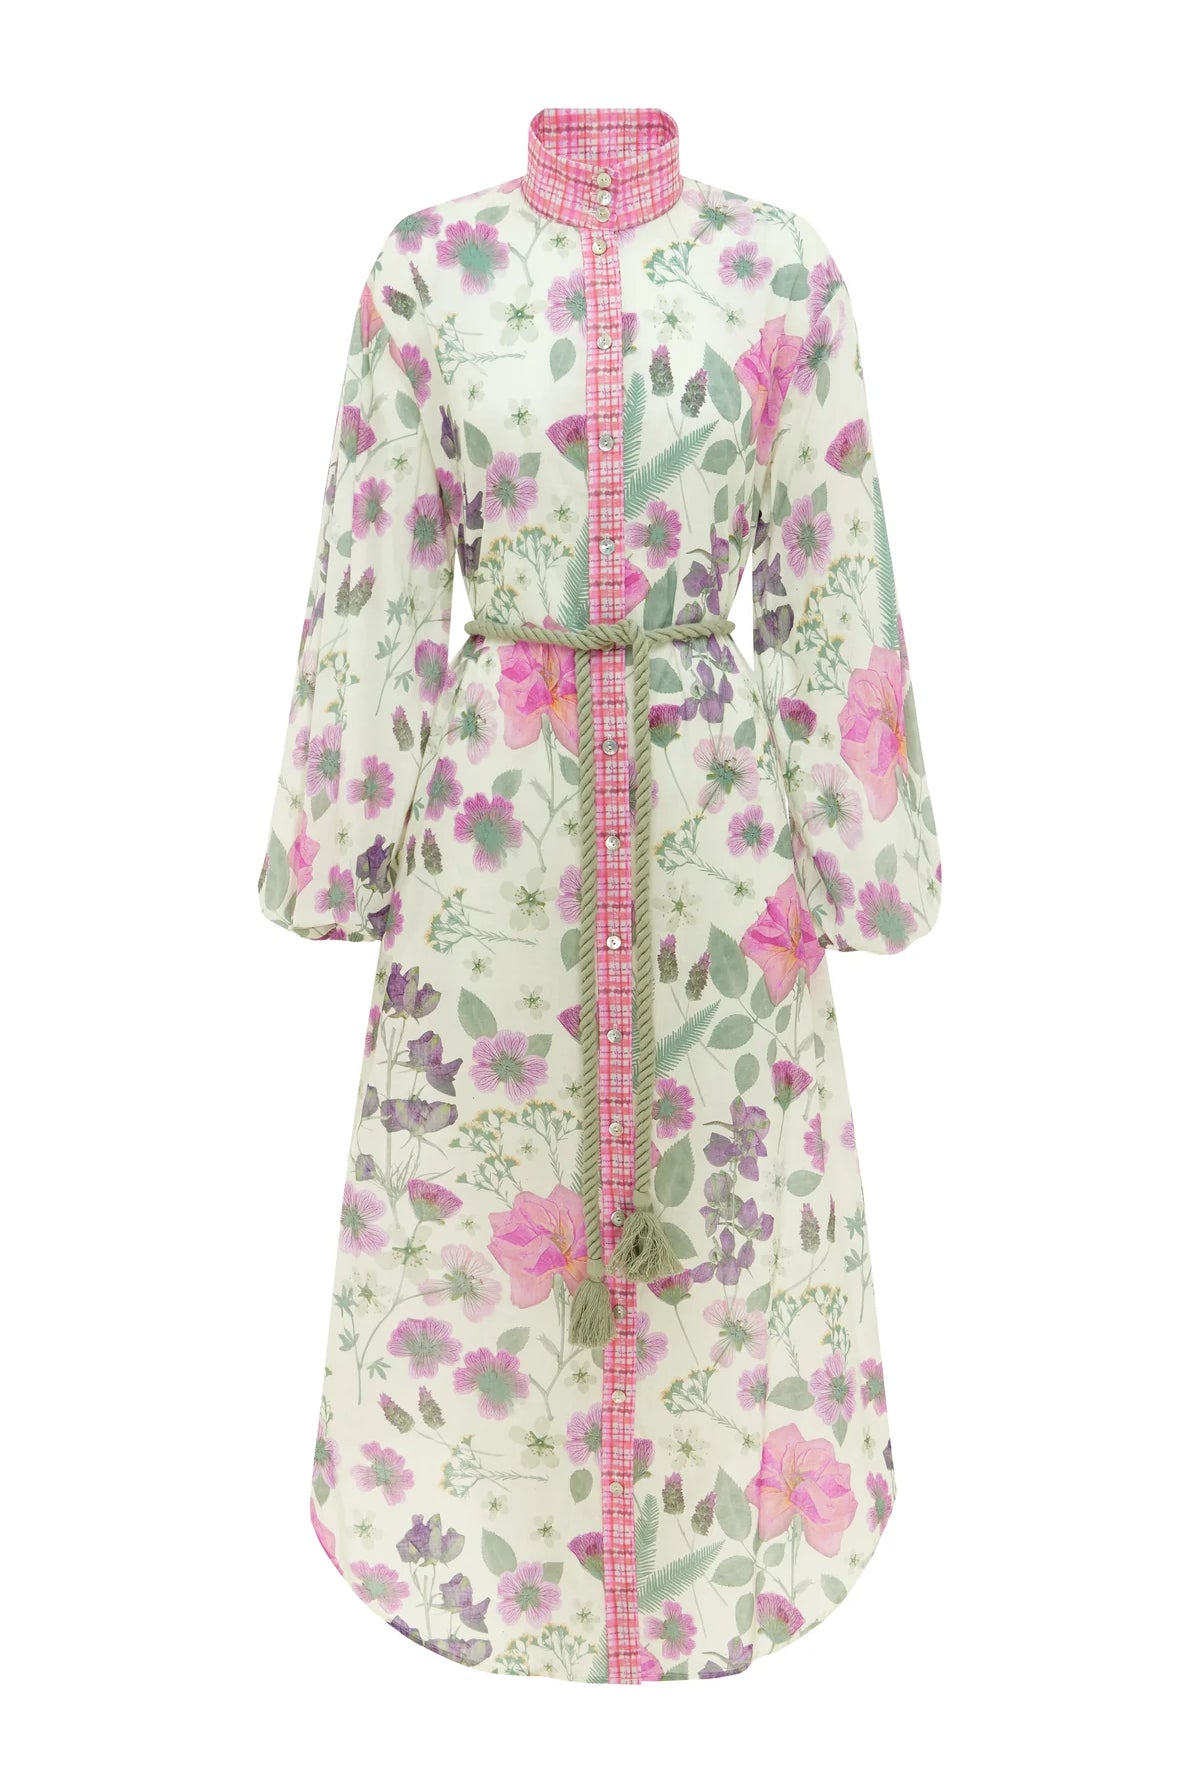 SUNSET LOVER - Foliage Shirt Dress Pressed Flora - Magpie Style